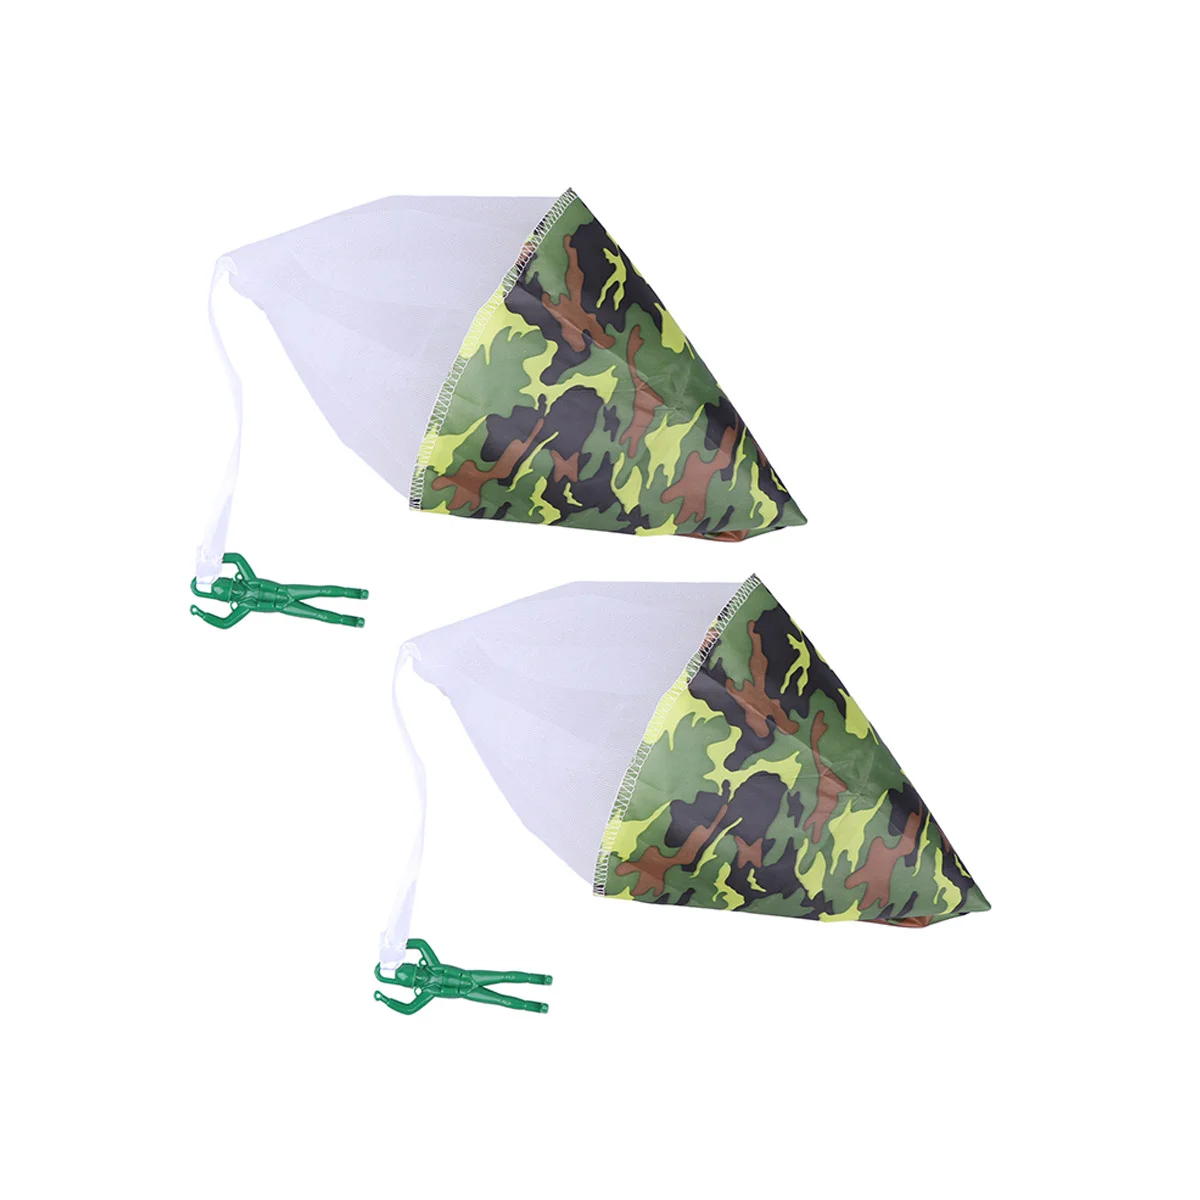 

2pcs Mini Soldier Parachute Toy Free Hand Throw Toys Kids Outdoor Playthings for Children Toddlers (Camouflage)